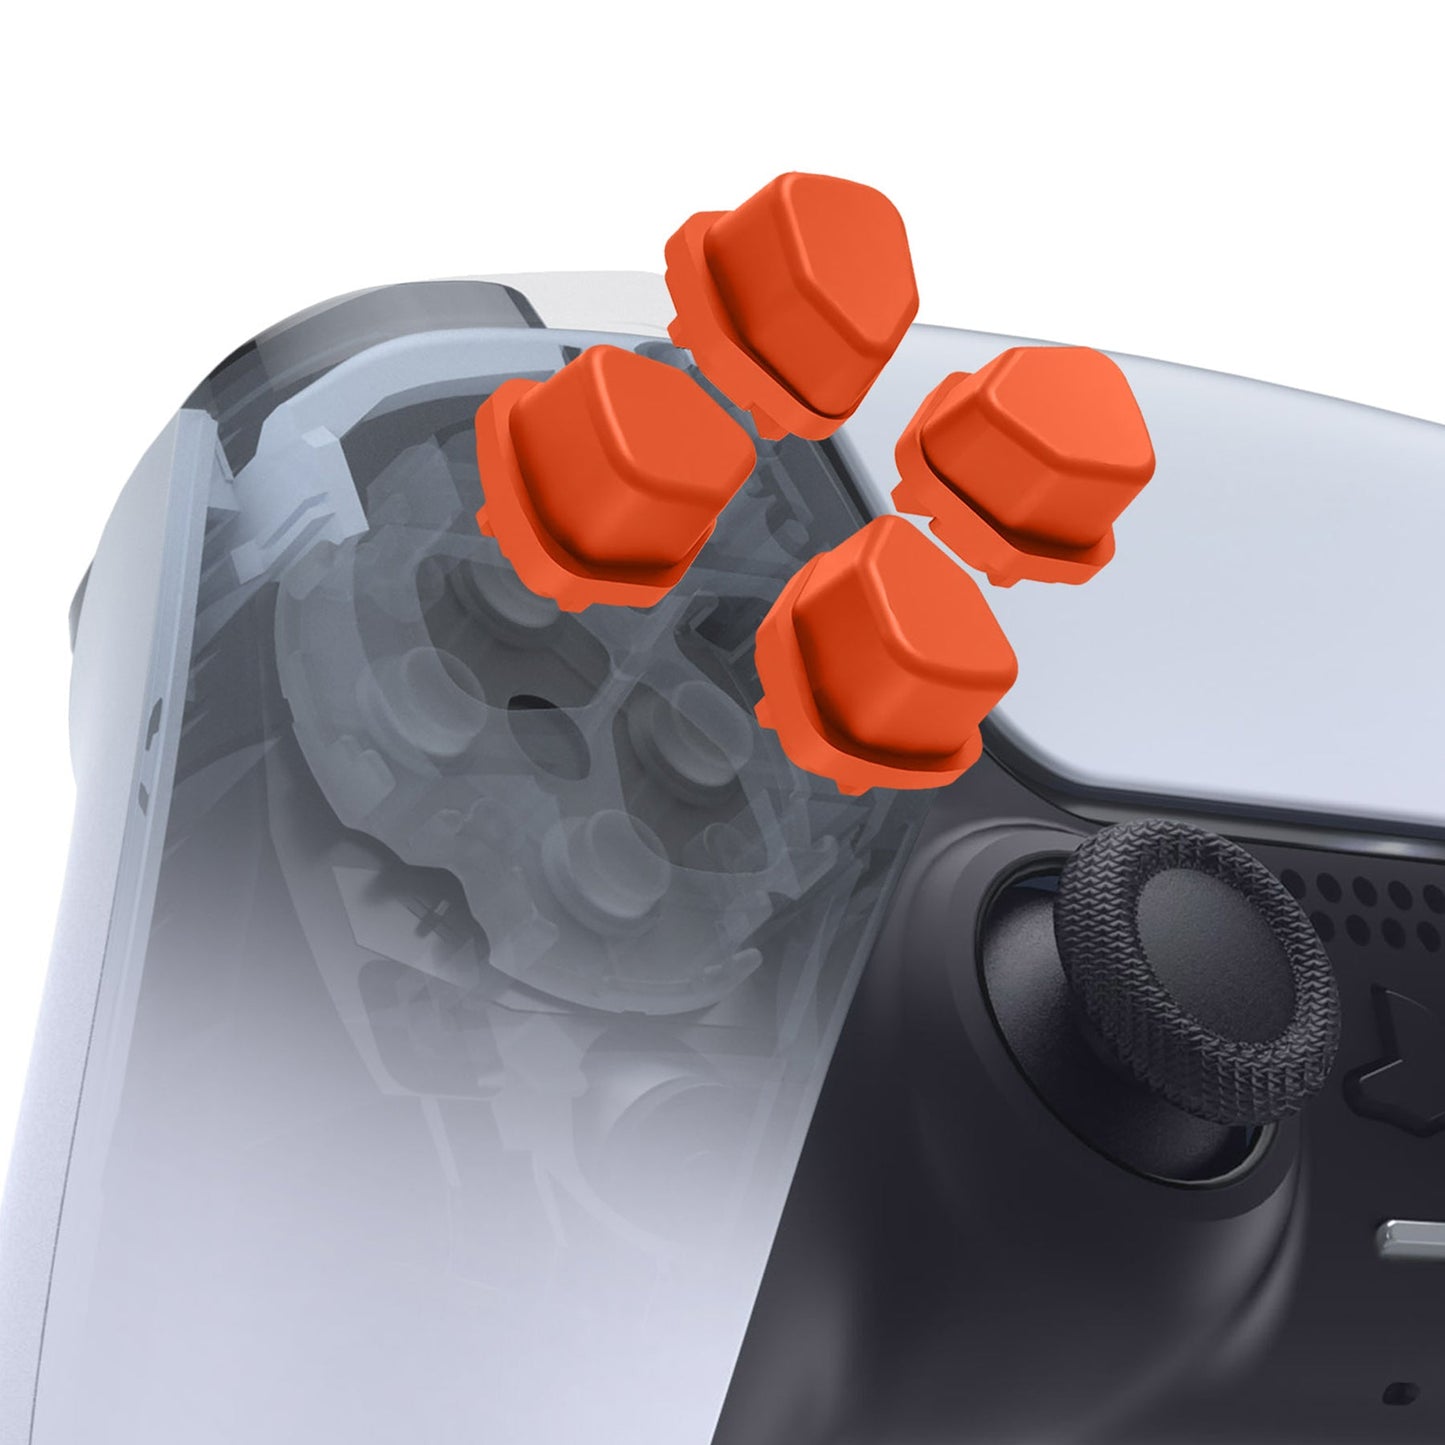 eXtremeRate Retail Ergonomic Split Dpad Buttons (SDP Buttons) for ps5 Controller, Orange Independent Dpad Direction Buttons for ps5, for ps4 All Model Controller - JPF8014